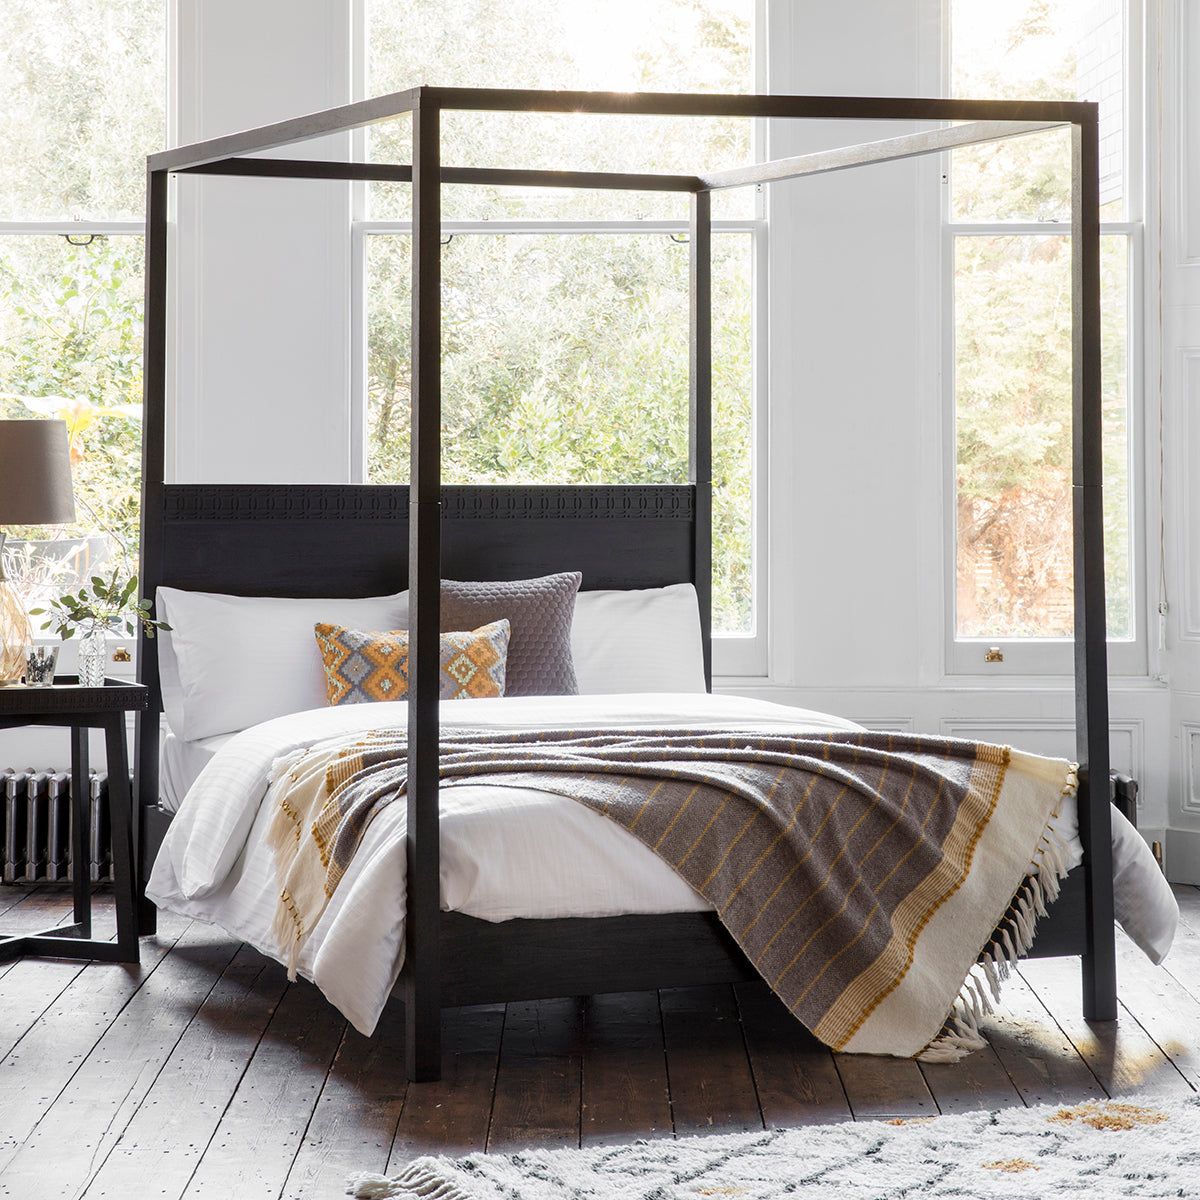 Laylah super king size 4 poster bed frame in charcoal black with inlaid detailing | malletandplane.com